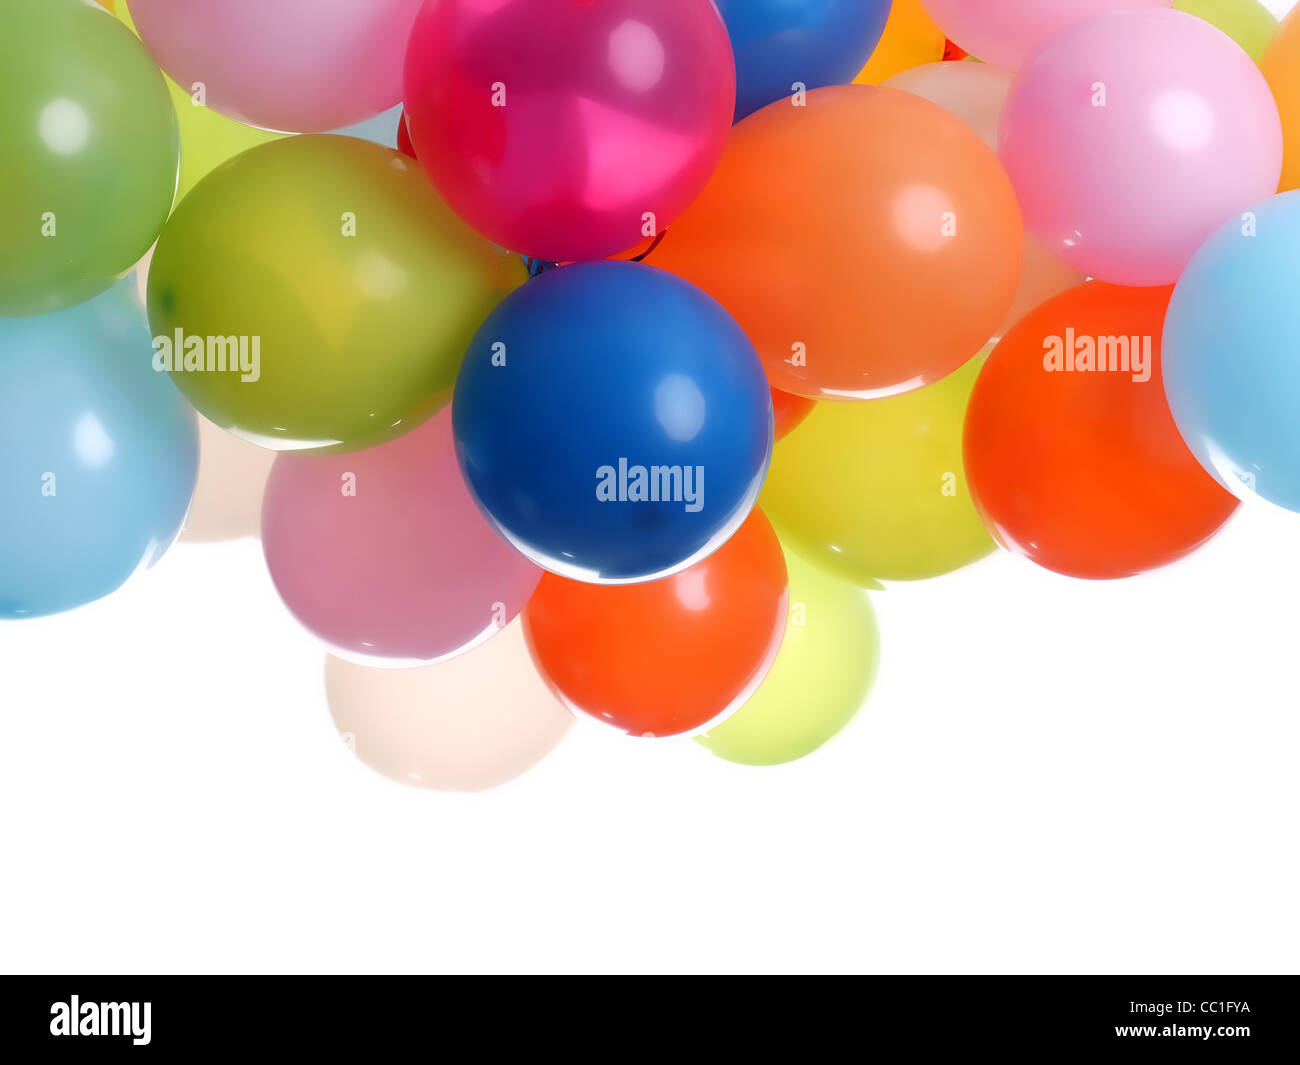 Colorful party balloons over white background Stock Photo